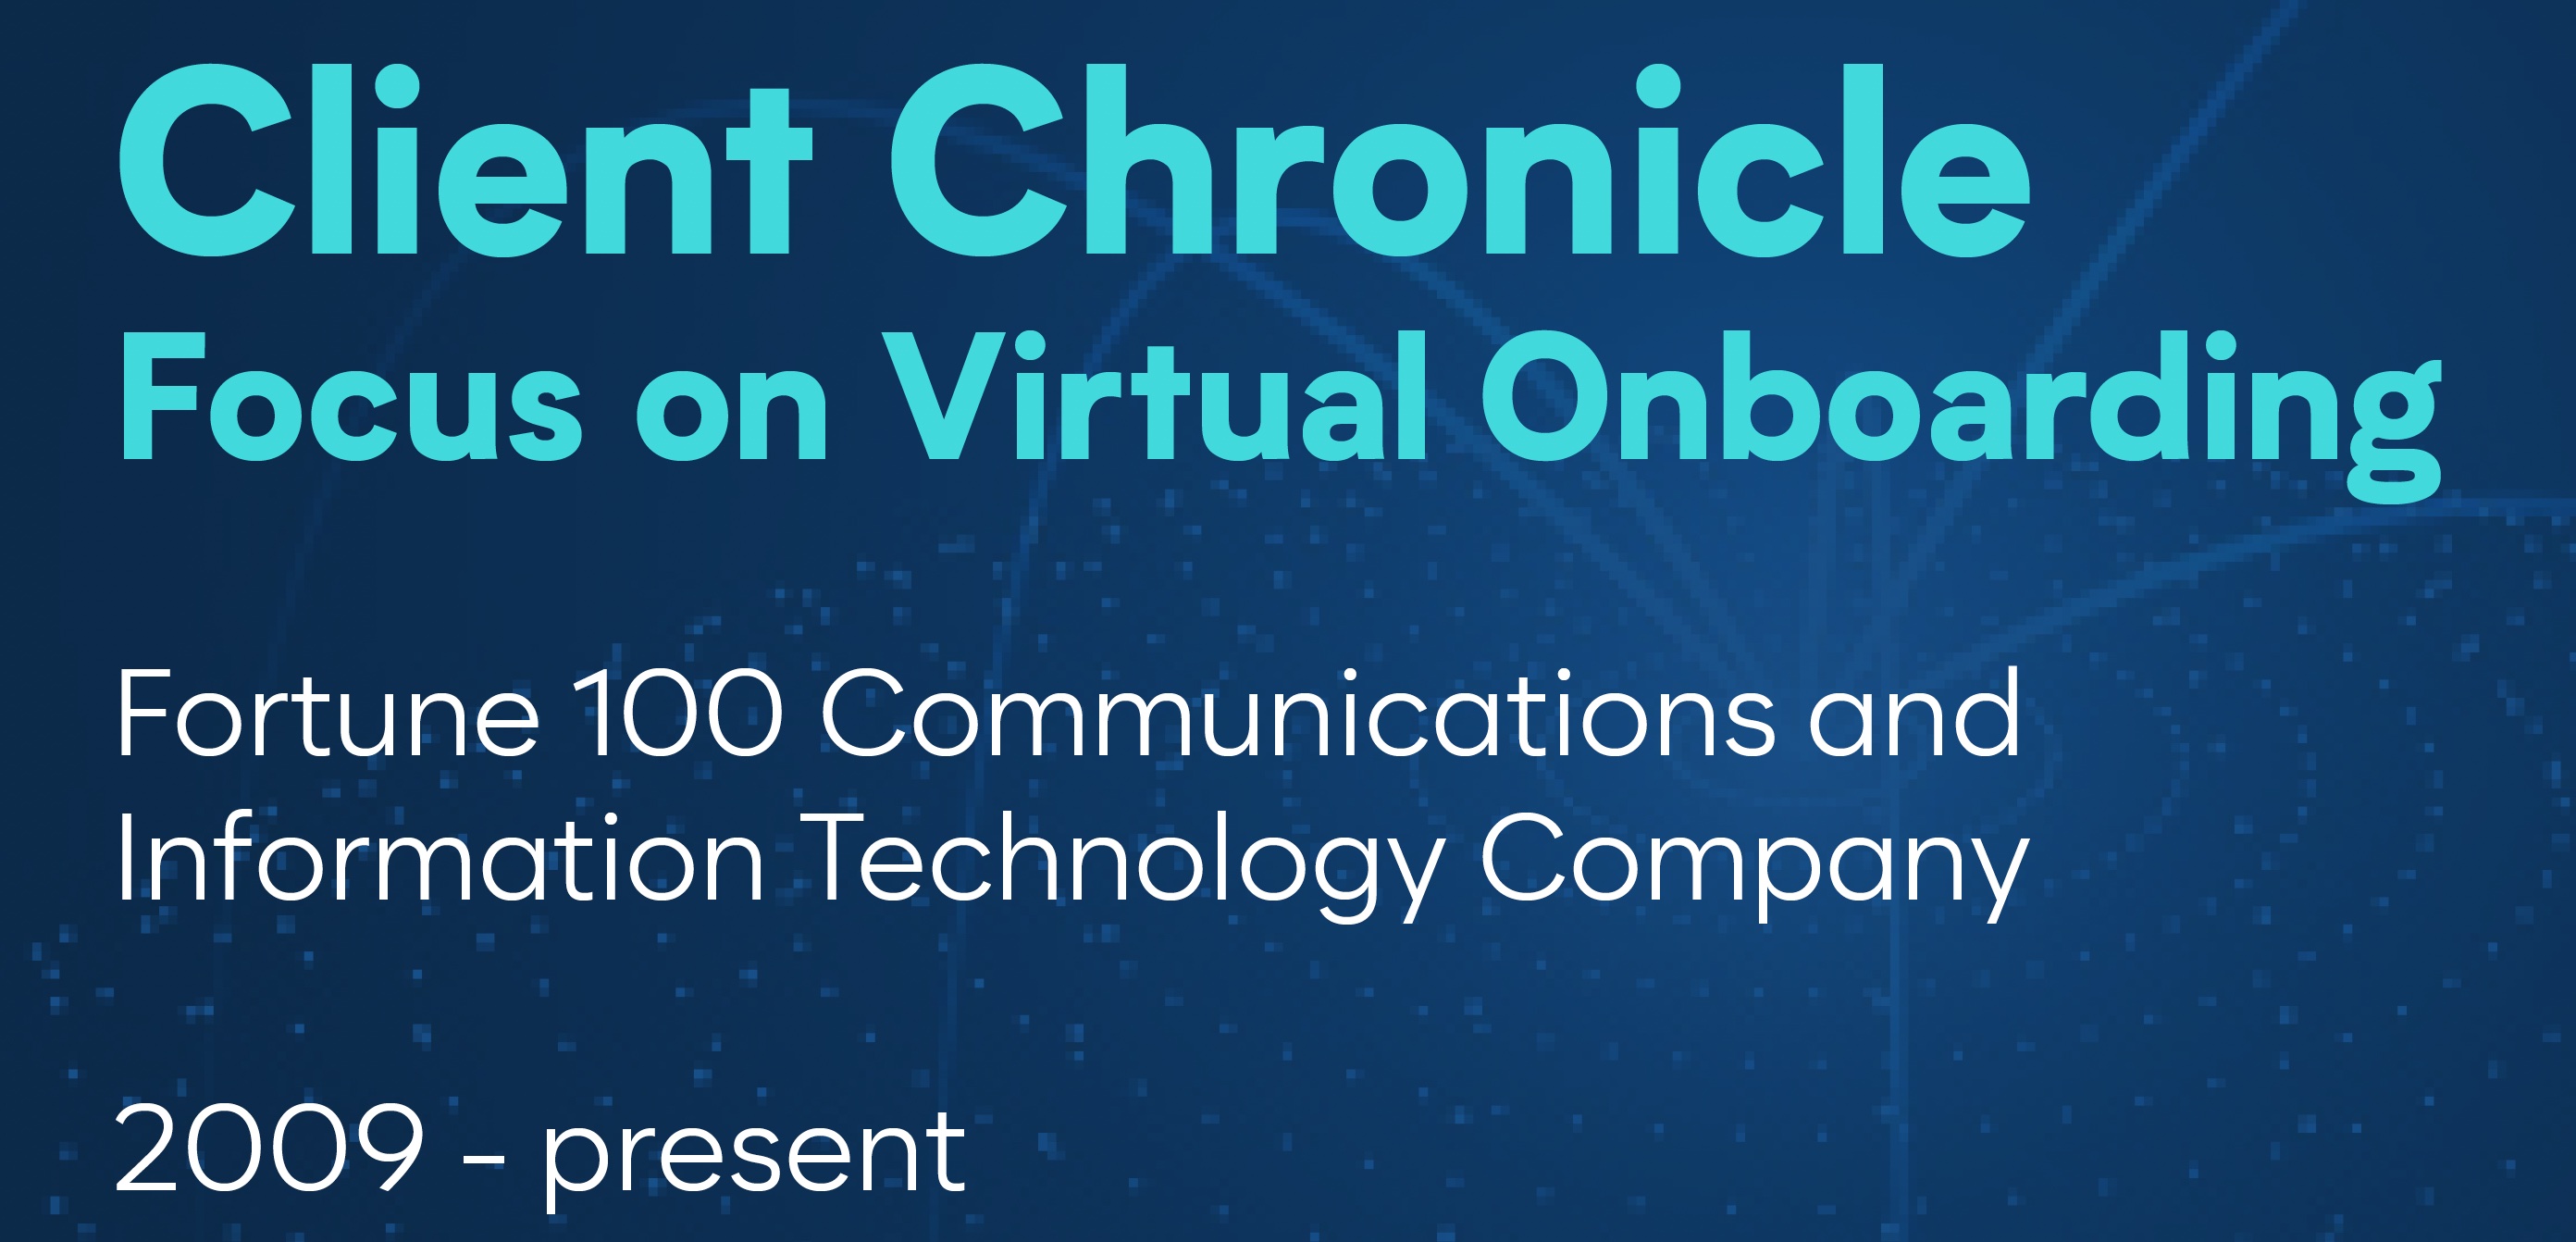 Client Chronicle - Focus on Virtual Onboarding